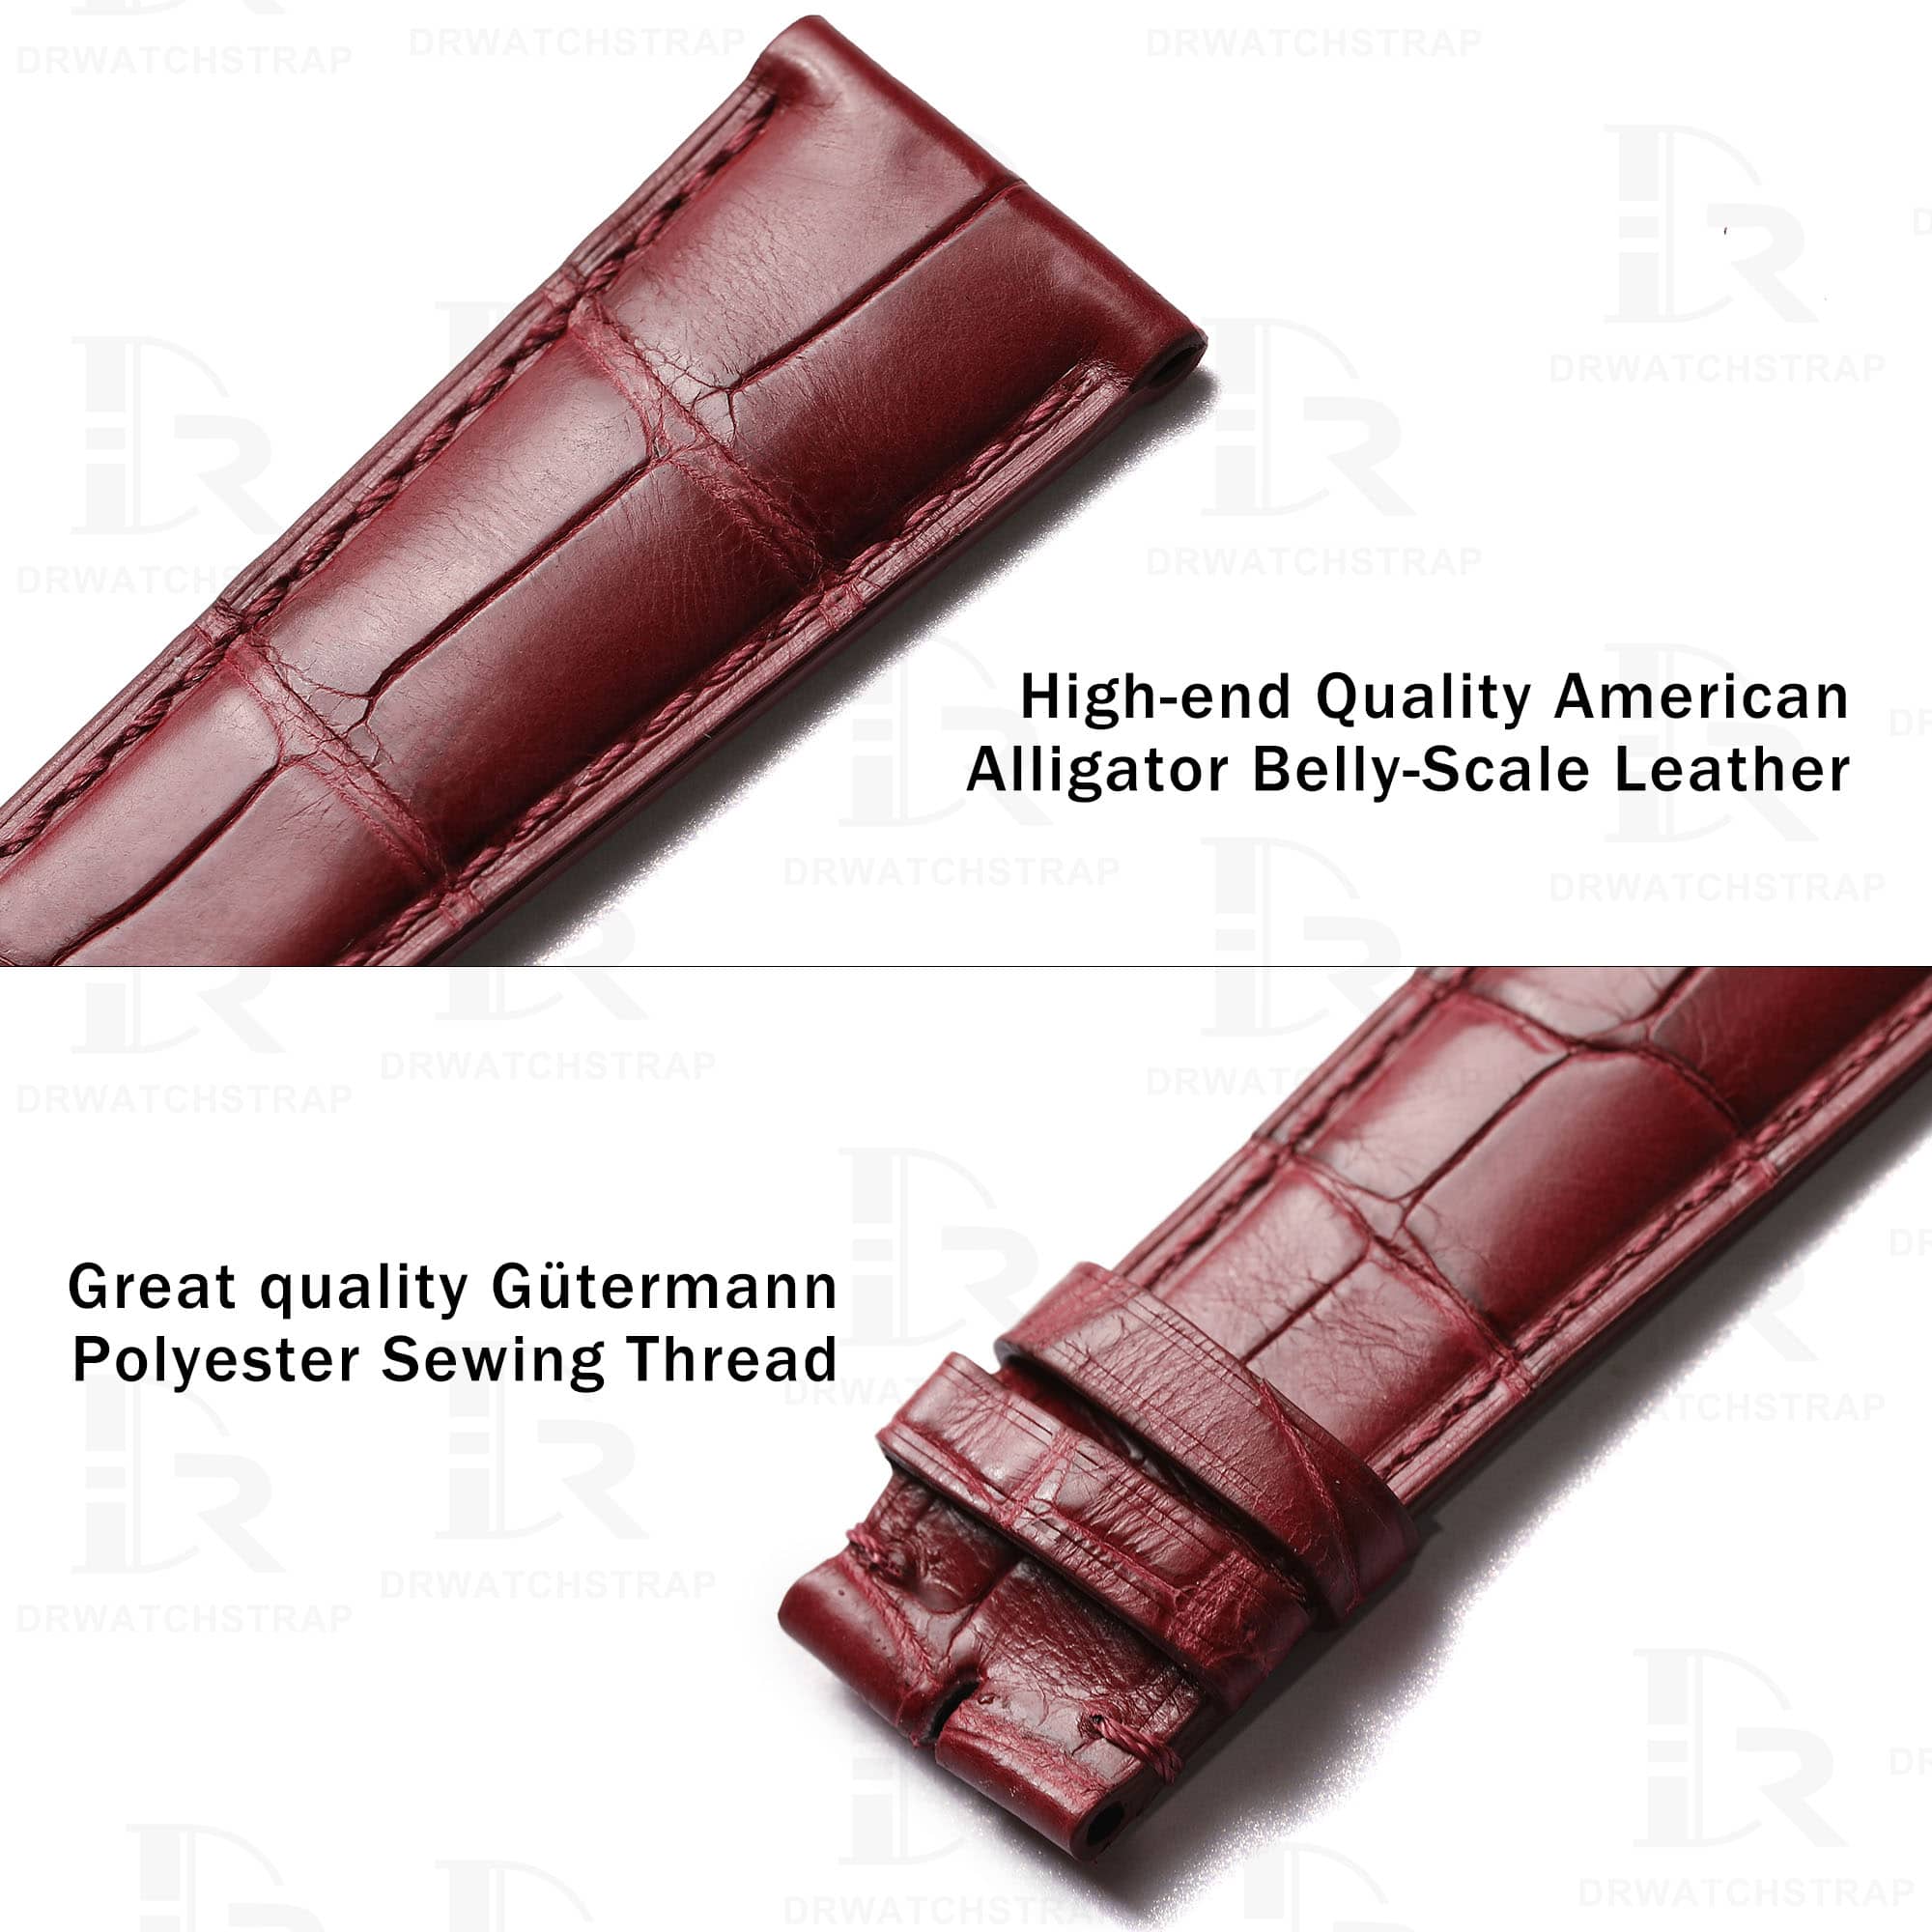 Genuin belly-scale alligator leather and best sewing thread